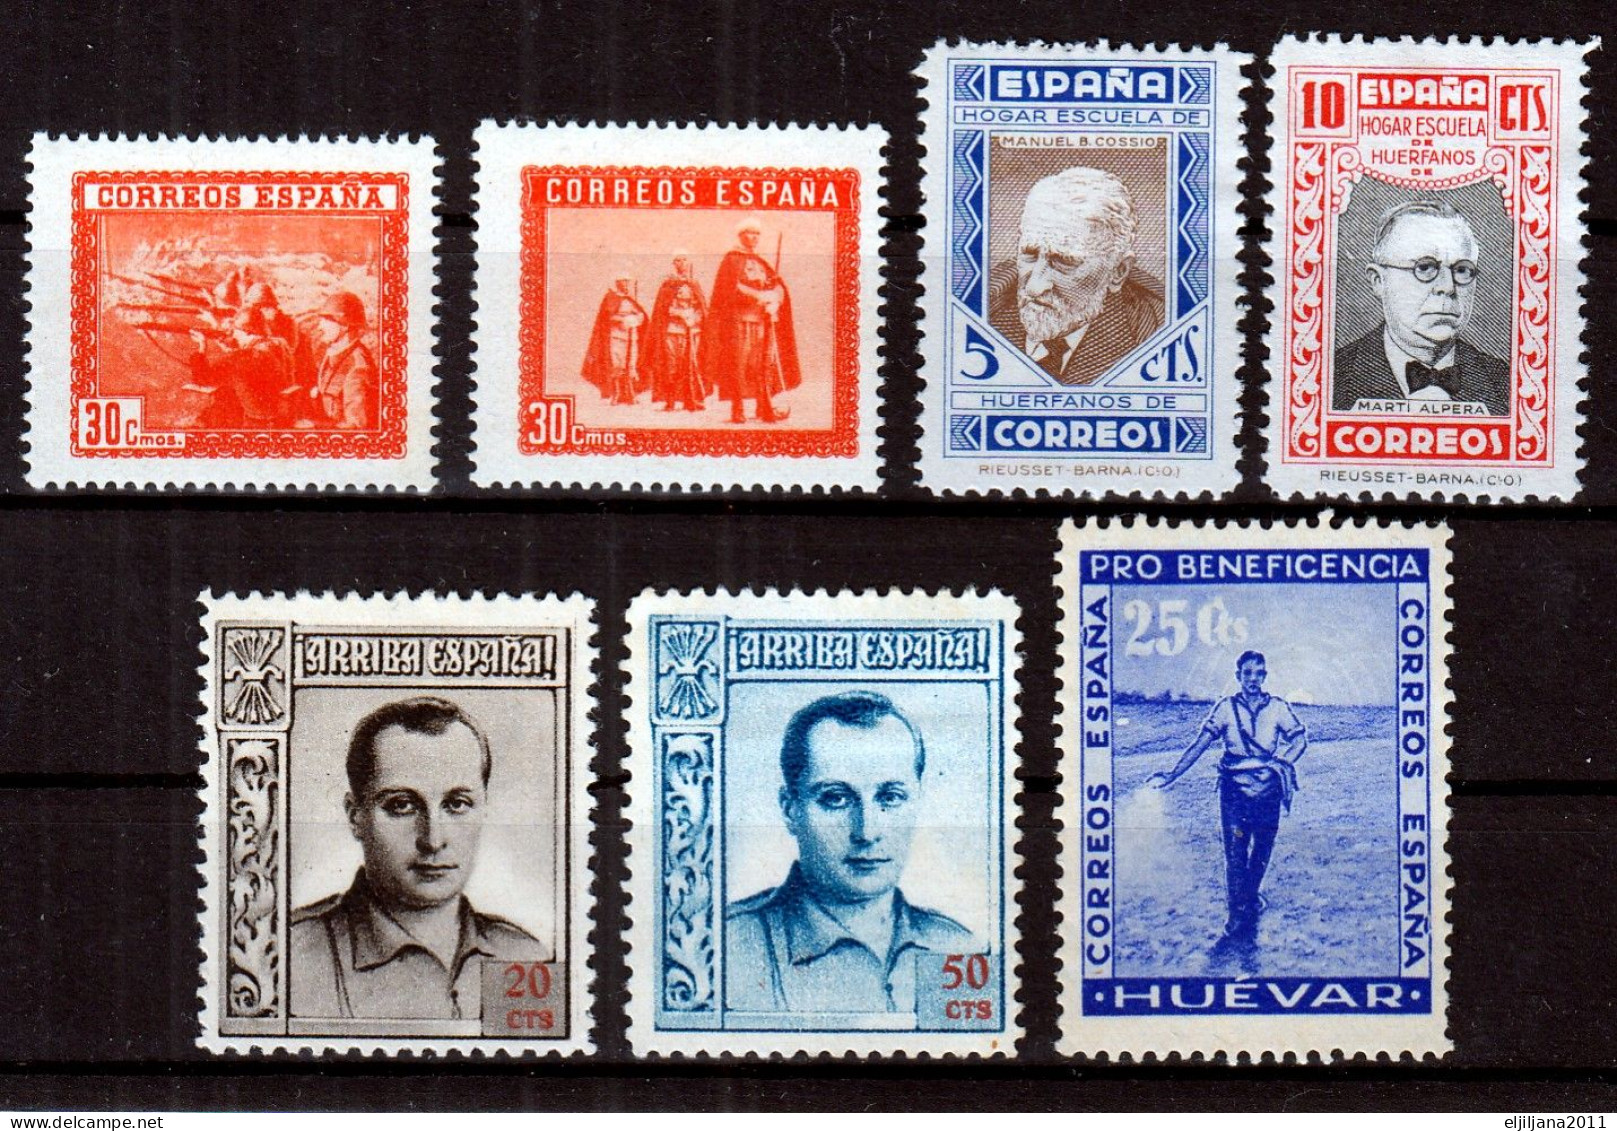 SALE !! 50 % OFF !! ⁕ SPAIN ⁕ Civil War / Orphans / Charity / Cinderella Stamps ⁕ 7v MH / MNH - Charity